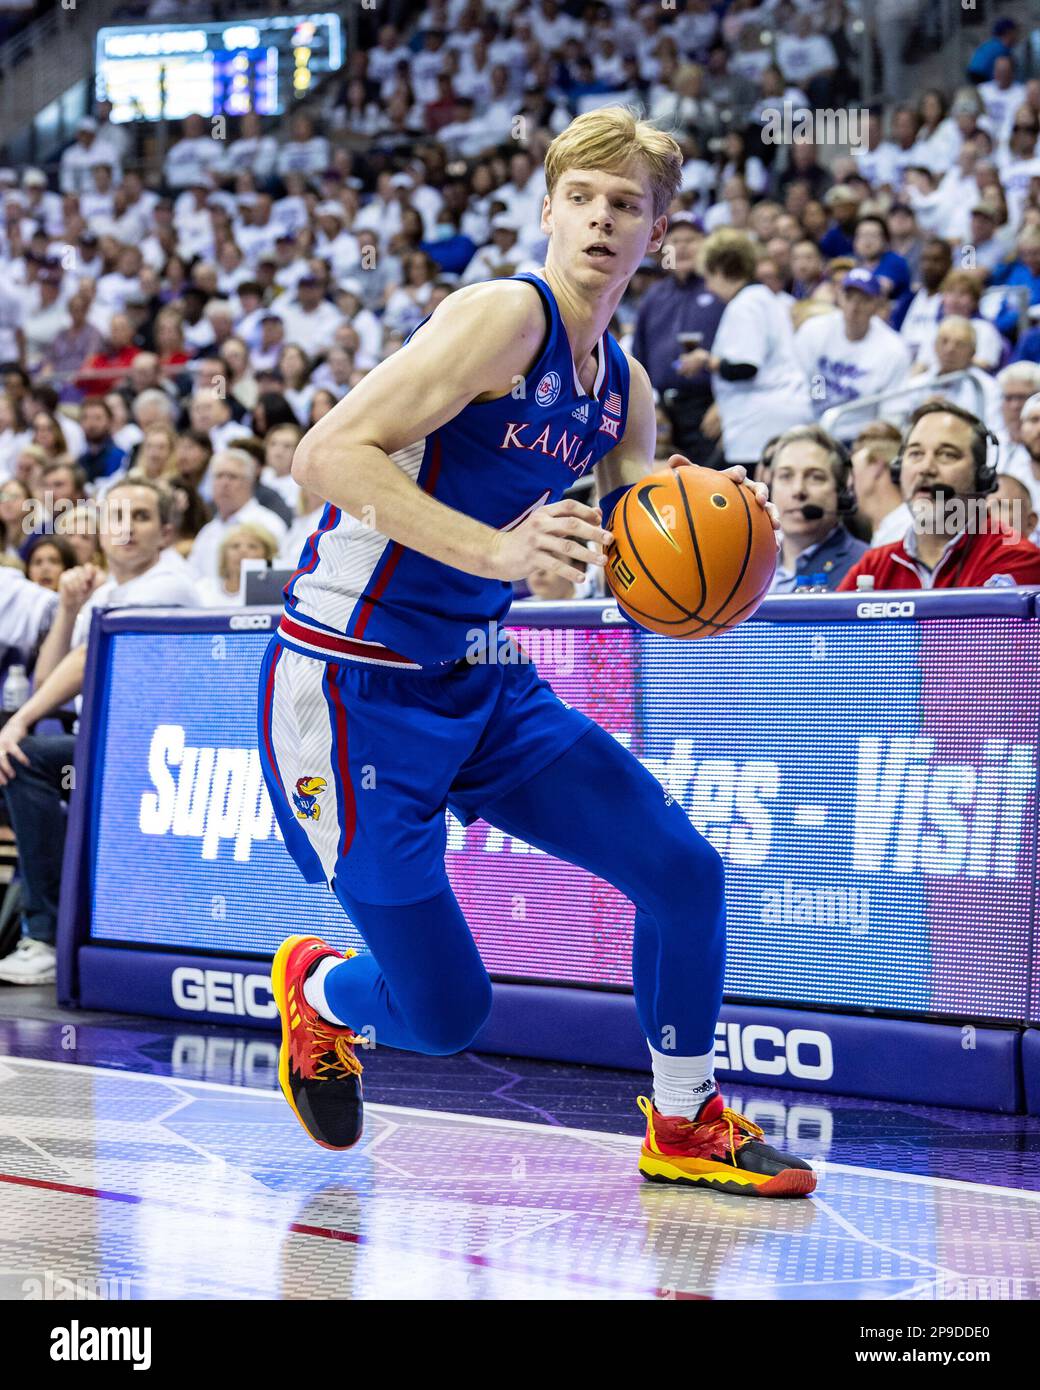 FORT WORTH, TX - FEBRUARY 20: Kansas Jayhawks guard Grady Dick (#4)  dribbles toward the basket during the college basketball game between the  TCU Horned Frogs and Kansas Jayhawks on February 20,